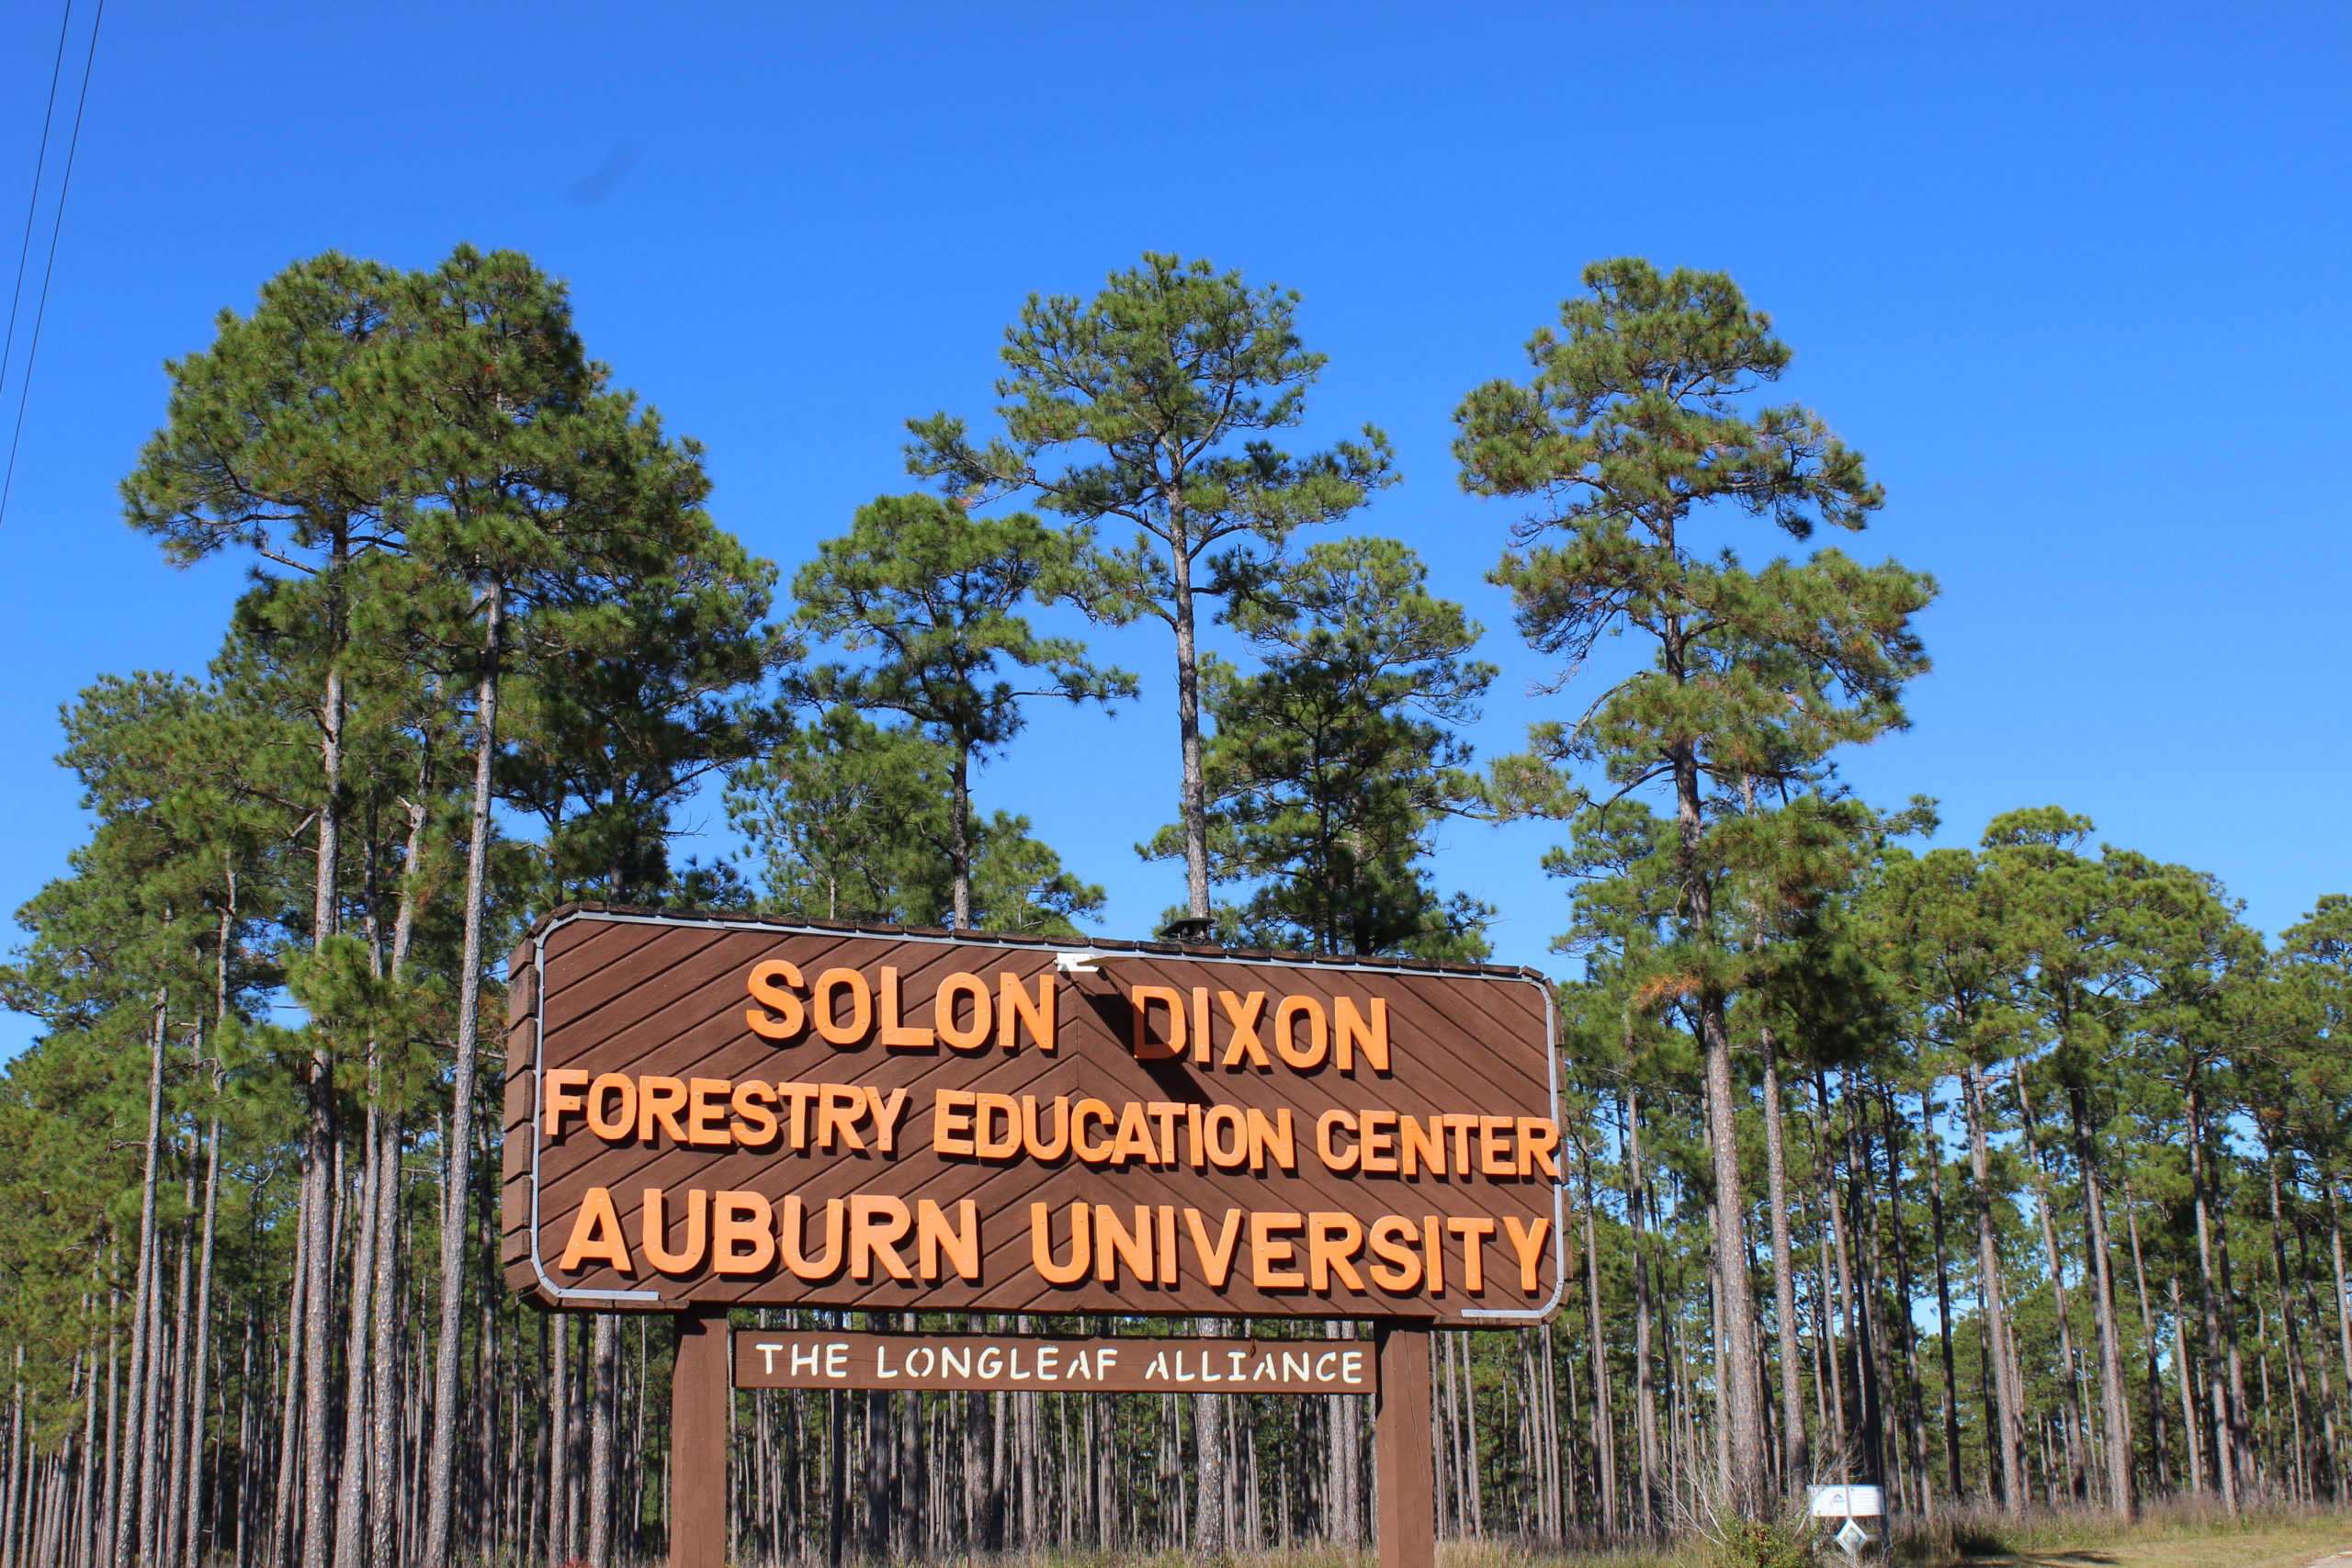 Solon Dixon Forestry Education entry road sign by Hwy 29